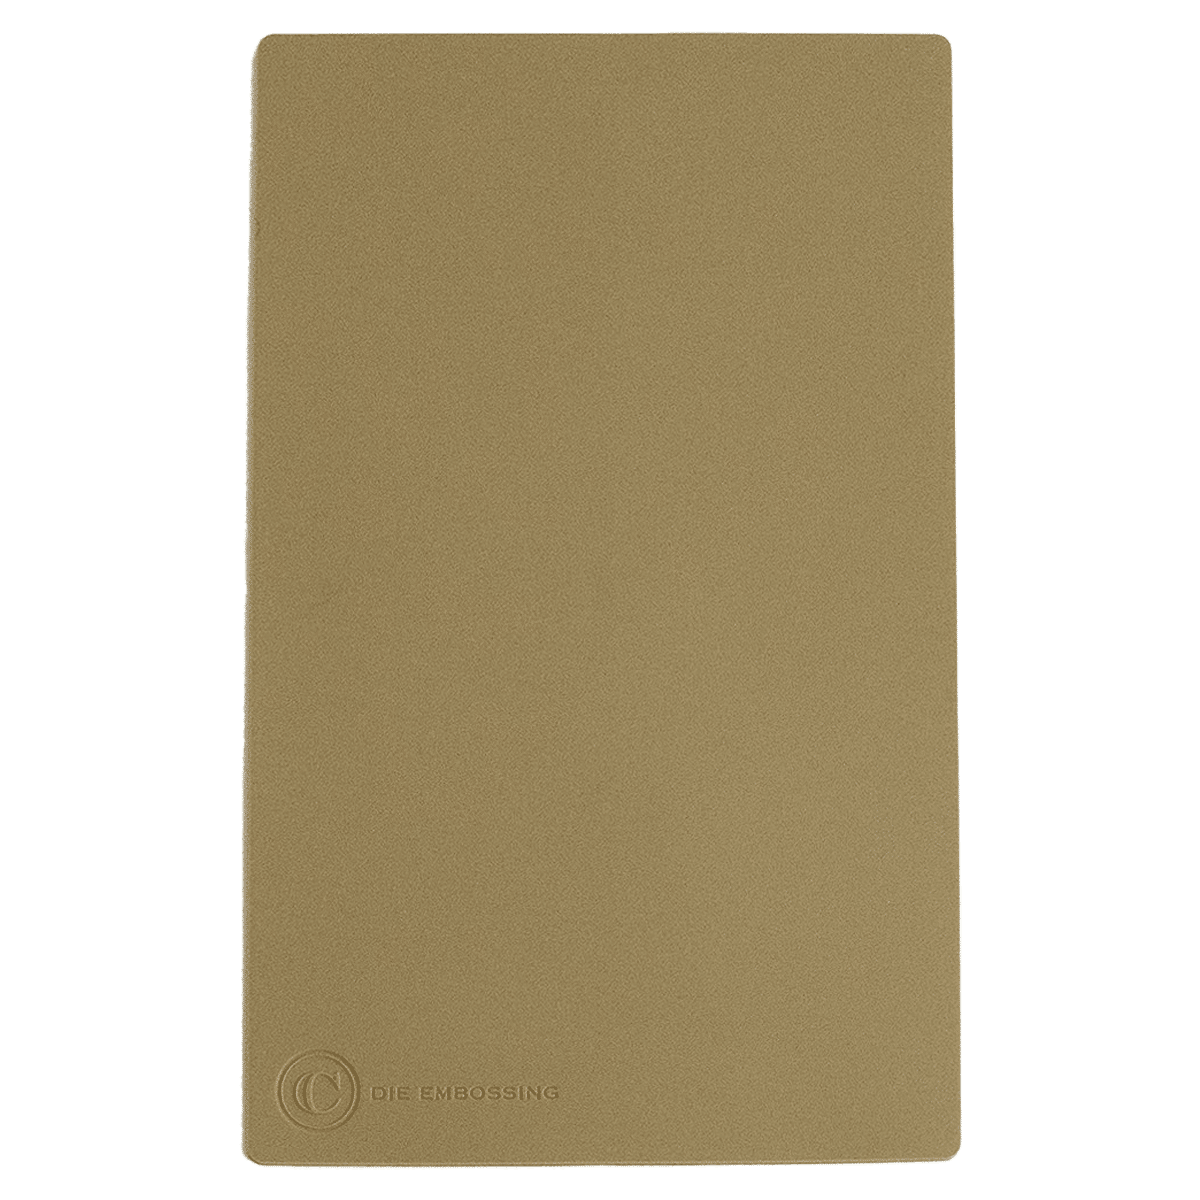 a brown paper with a white background.